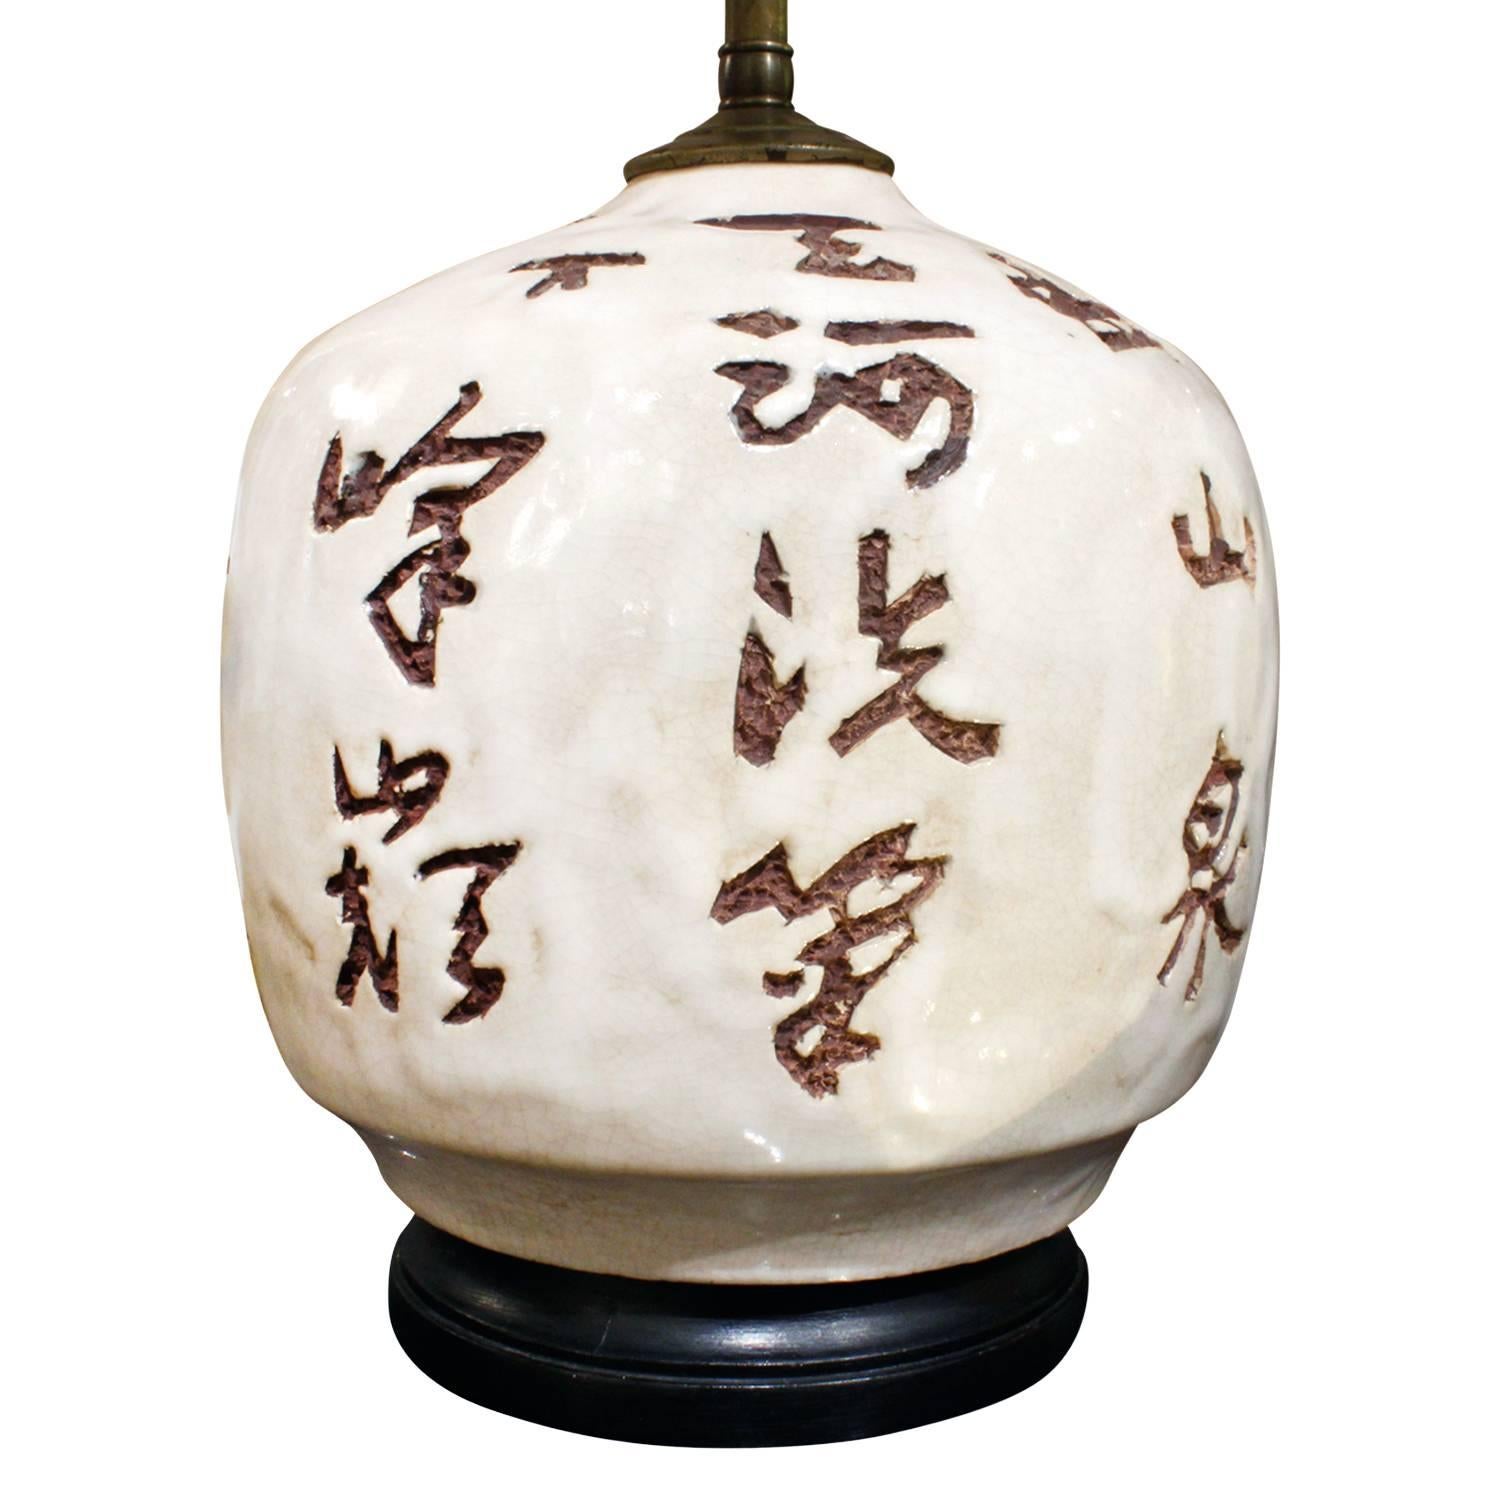 American Pair of Ceramic Lamps with Chinese Character Decoration, 1950s